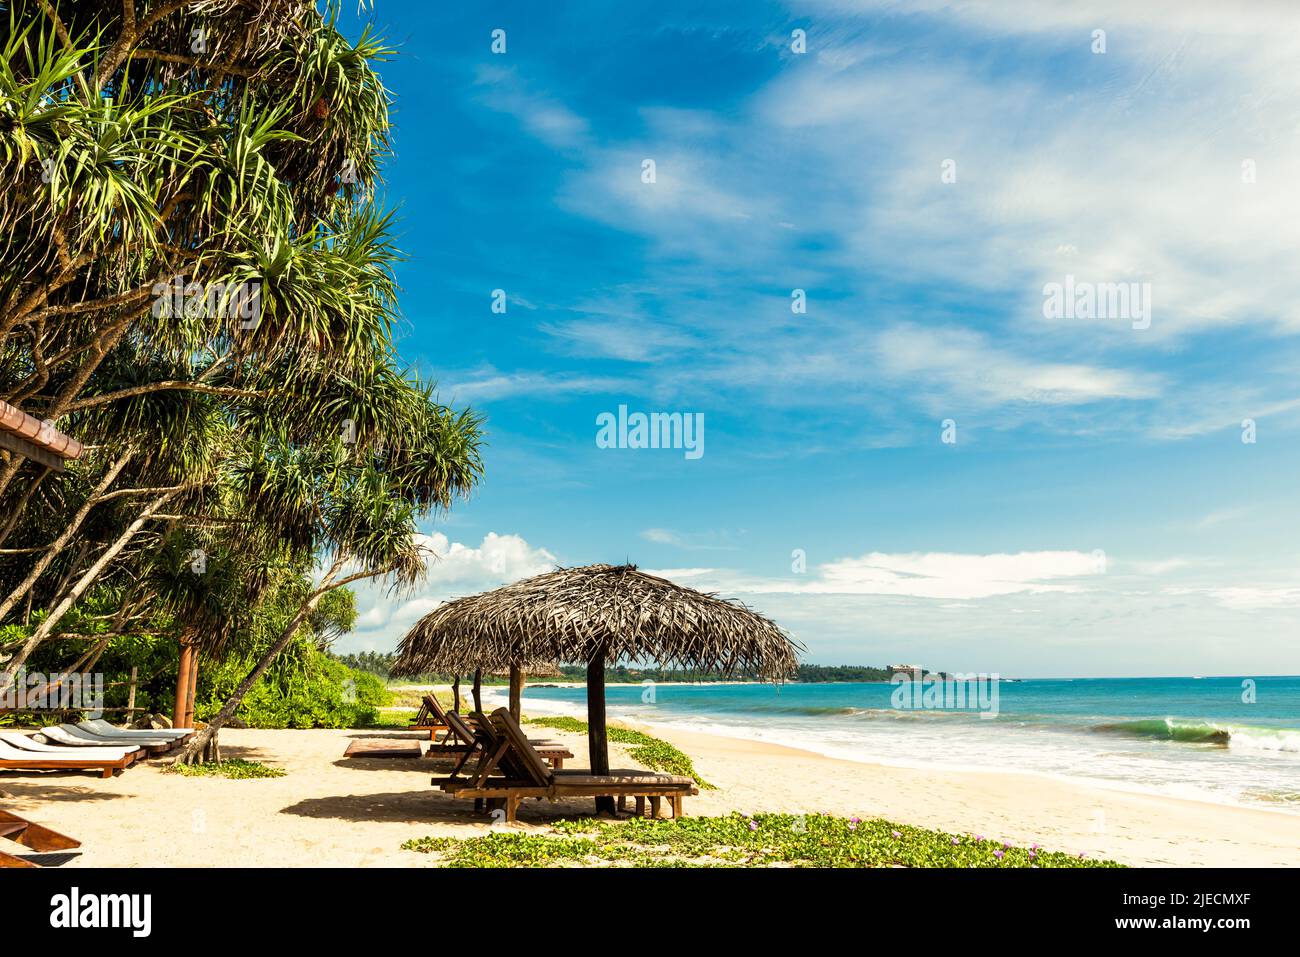 Tropical resort view, sunbeds and umbrellas on ocean beach, Sri Lanka. Scenic view of sea sand shore with palm trees and blue sky. Idyllic landscape b Stock Photo